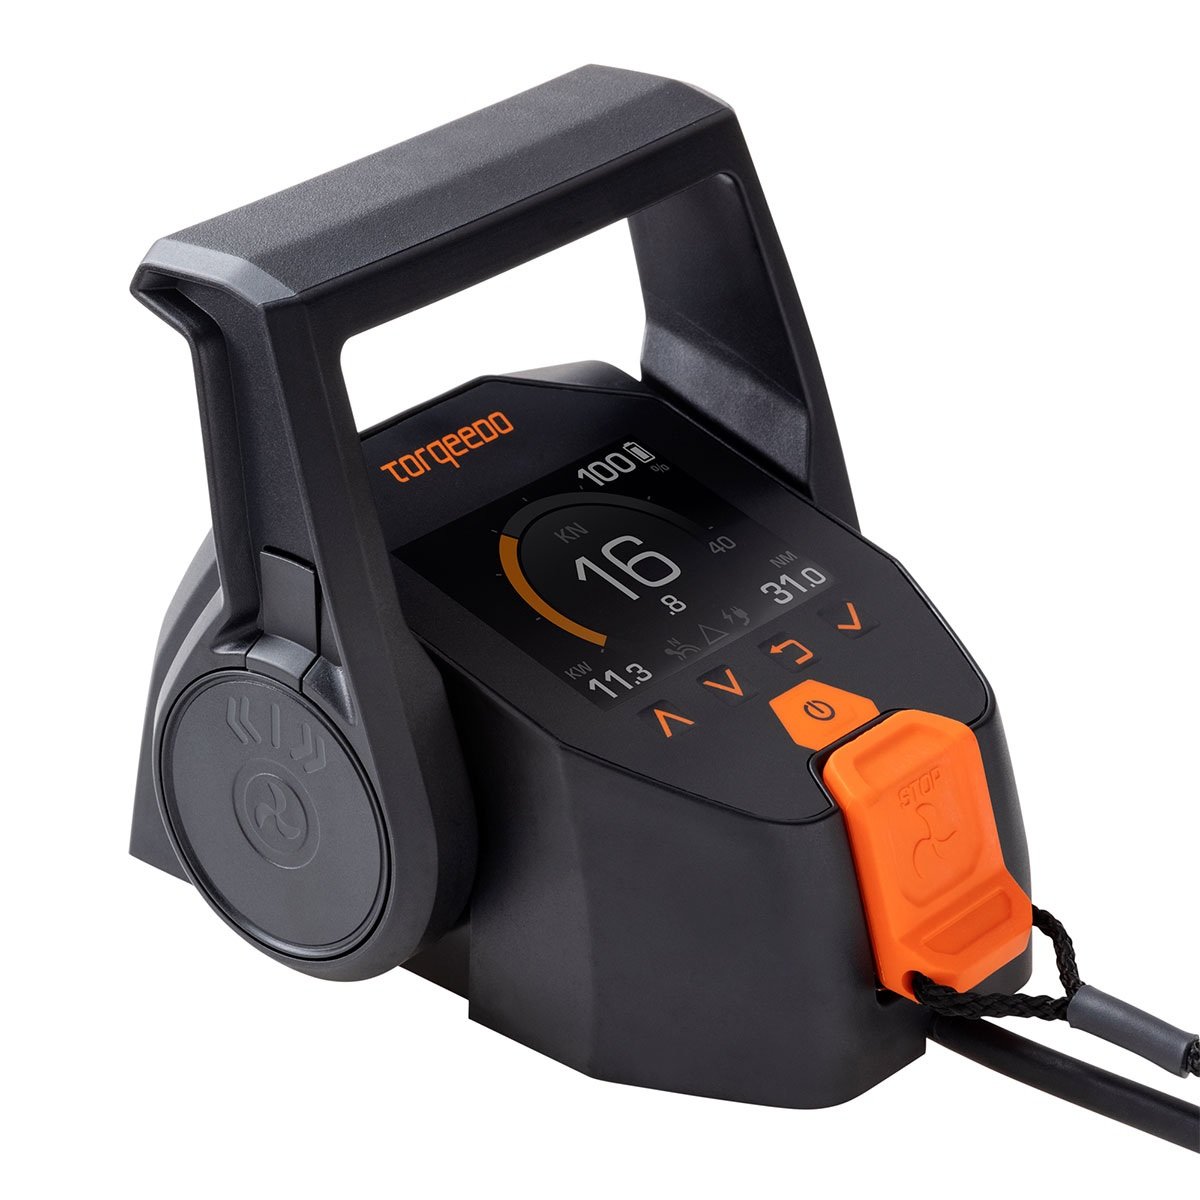 TorqLink throttle with colour display